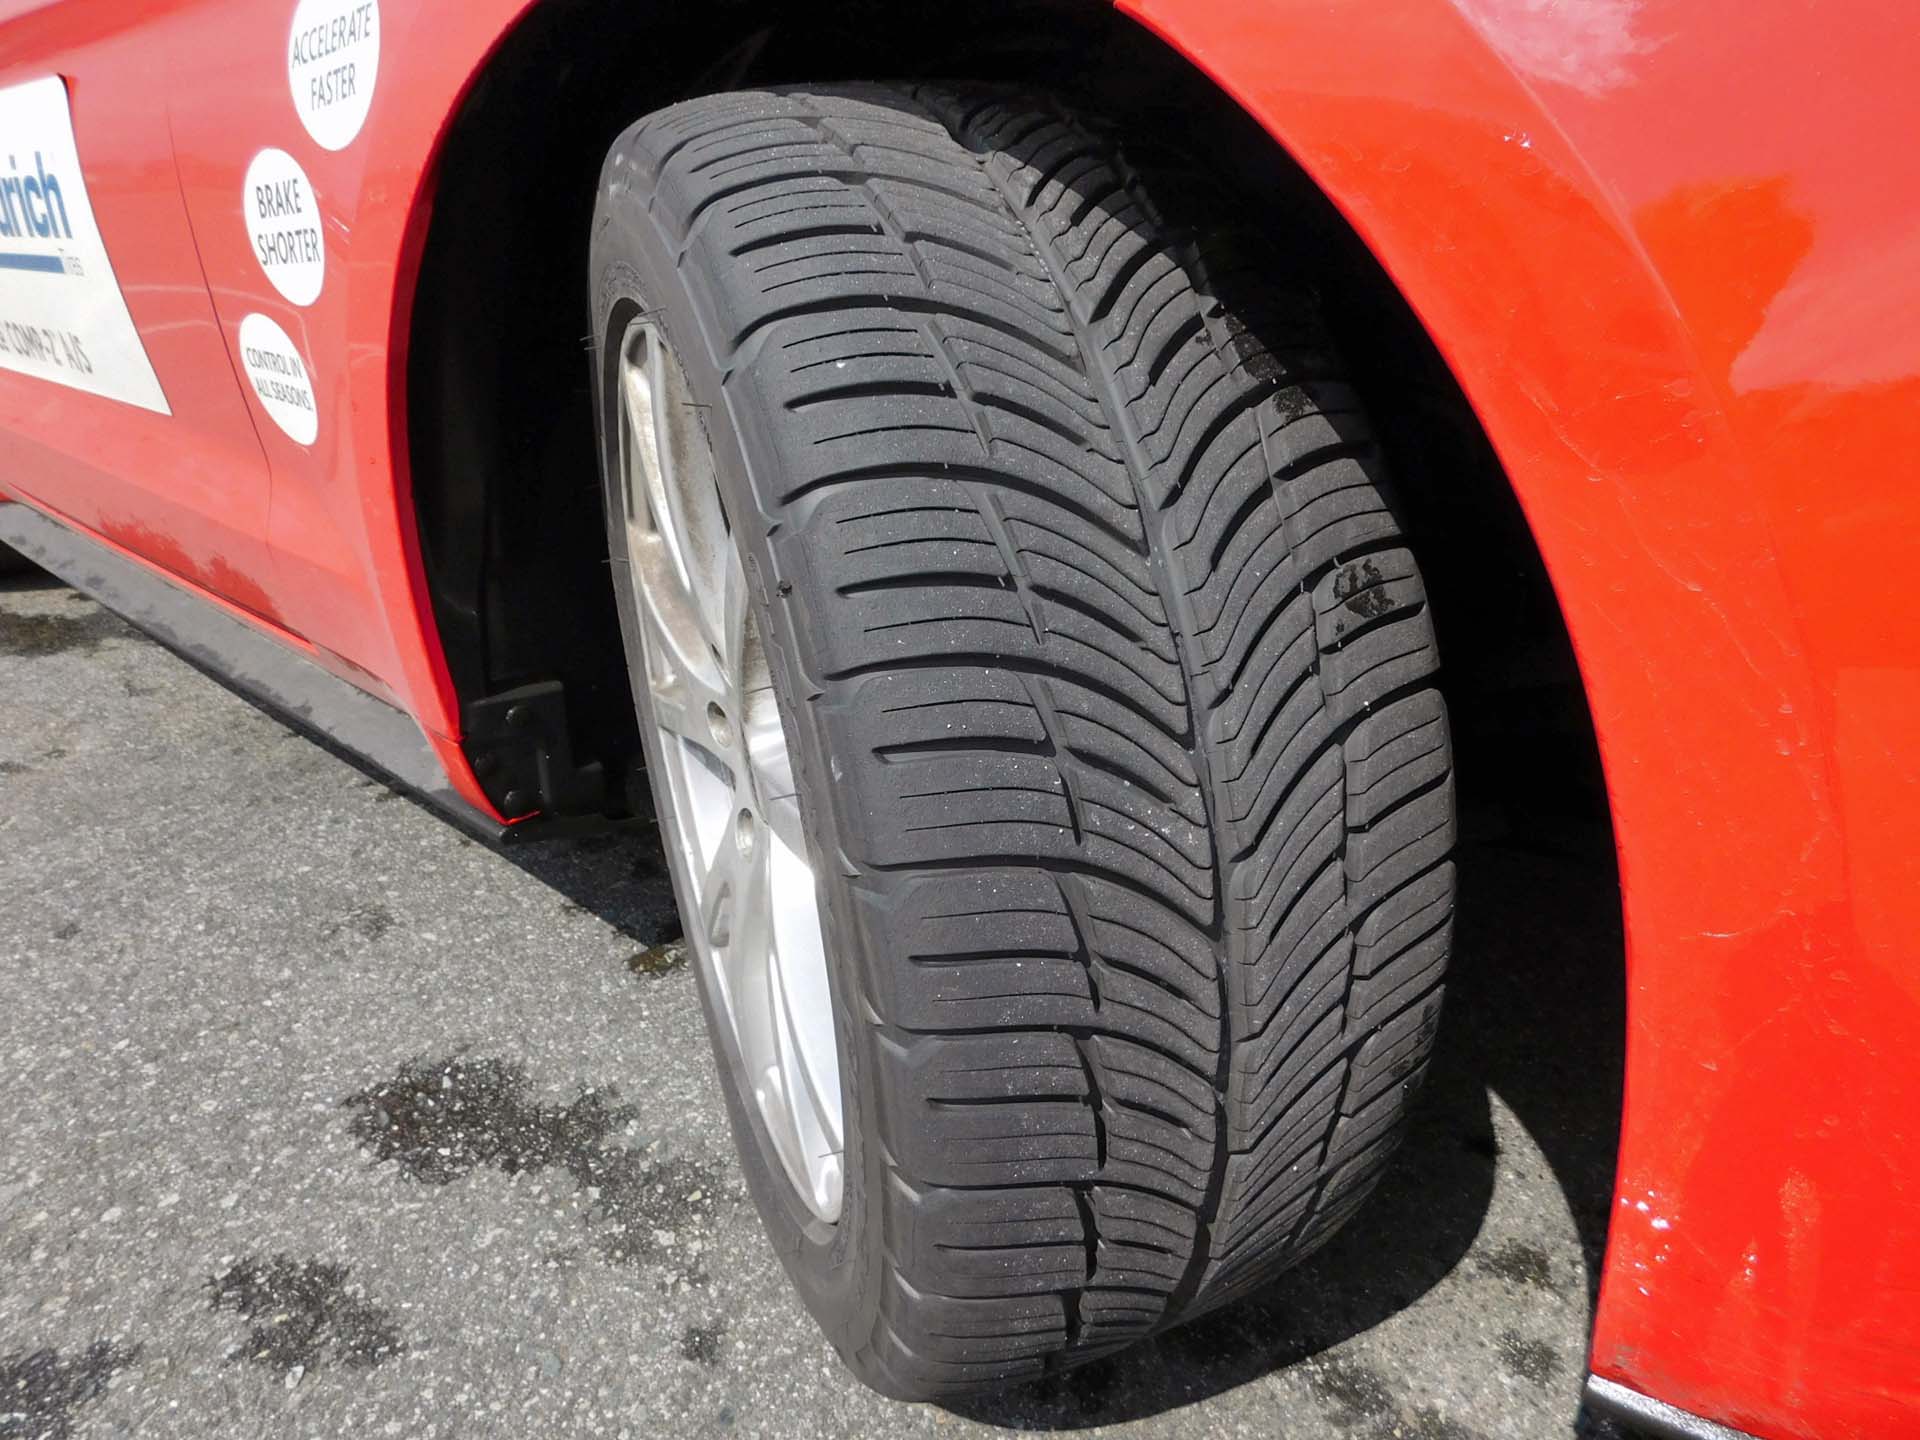 bfgoodrich g force comp 2 all season review